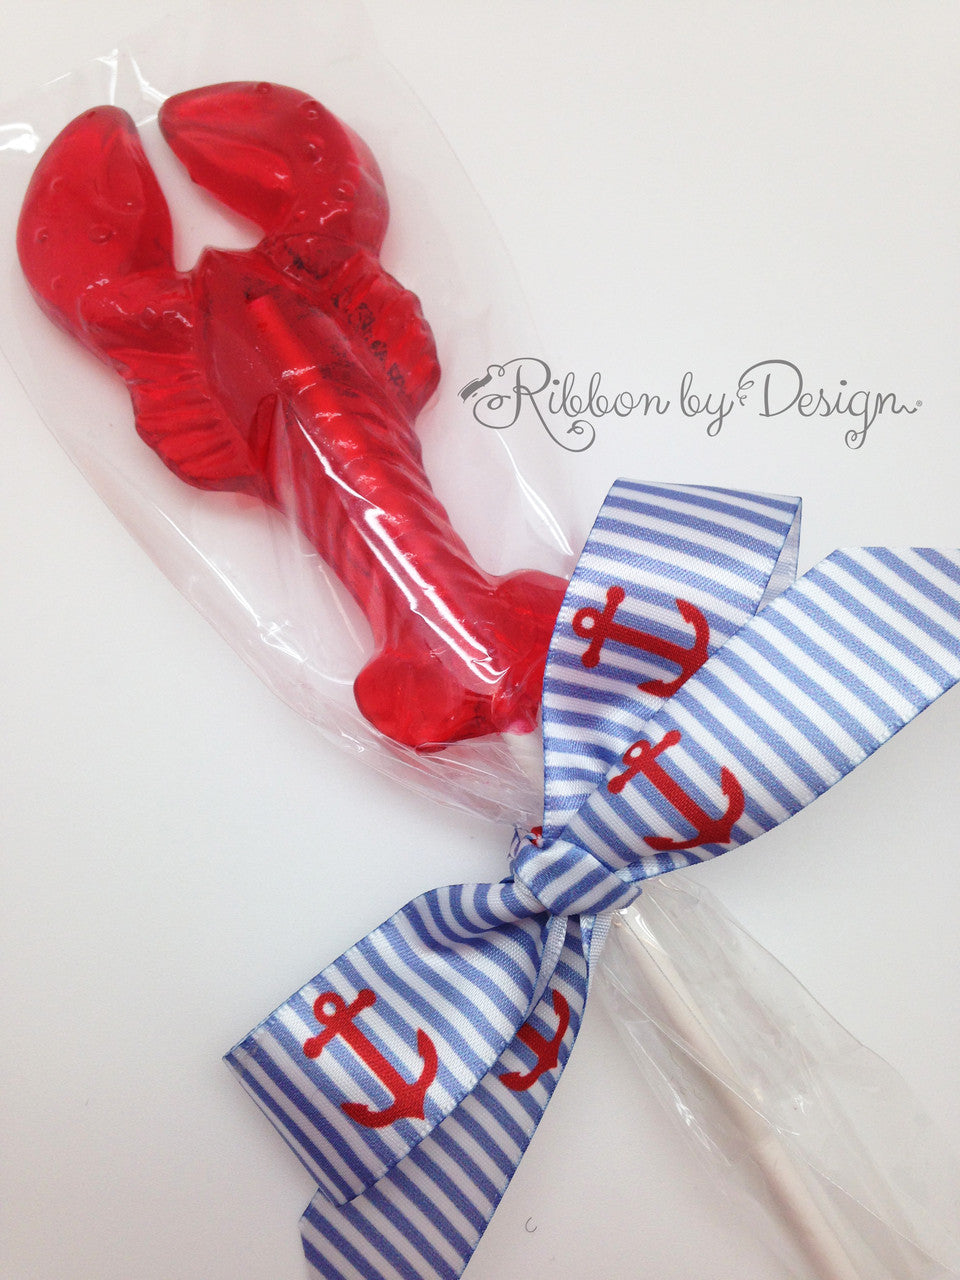 strips of red shiny ribbon and a bow over a white background with